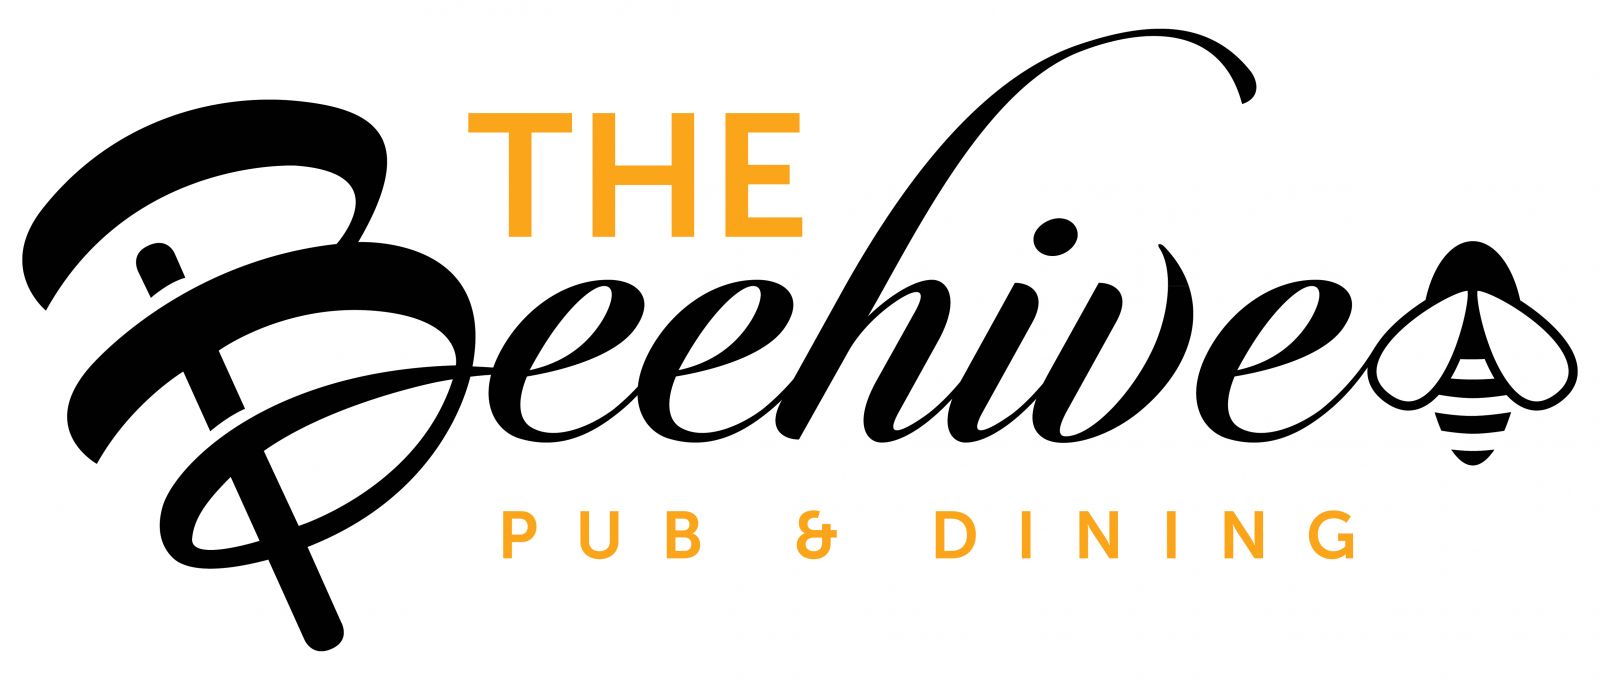 The Beehive in Bristol - Pub and Restaurant